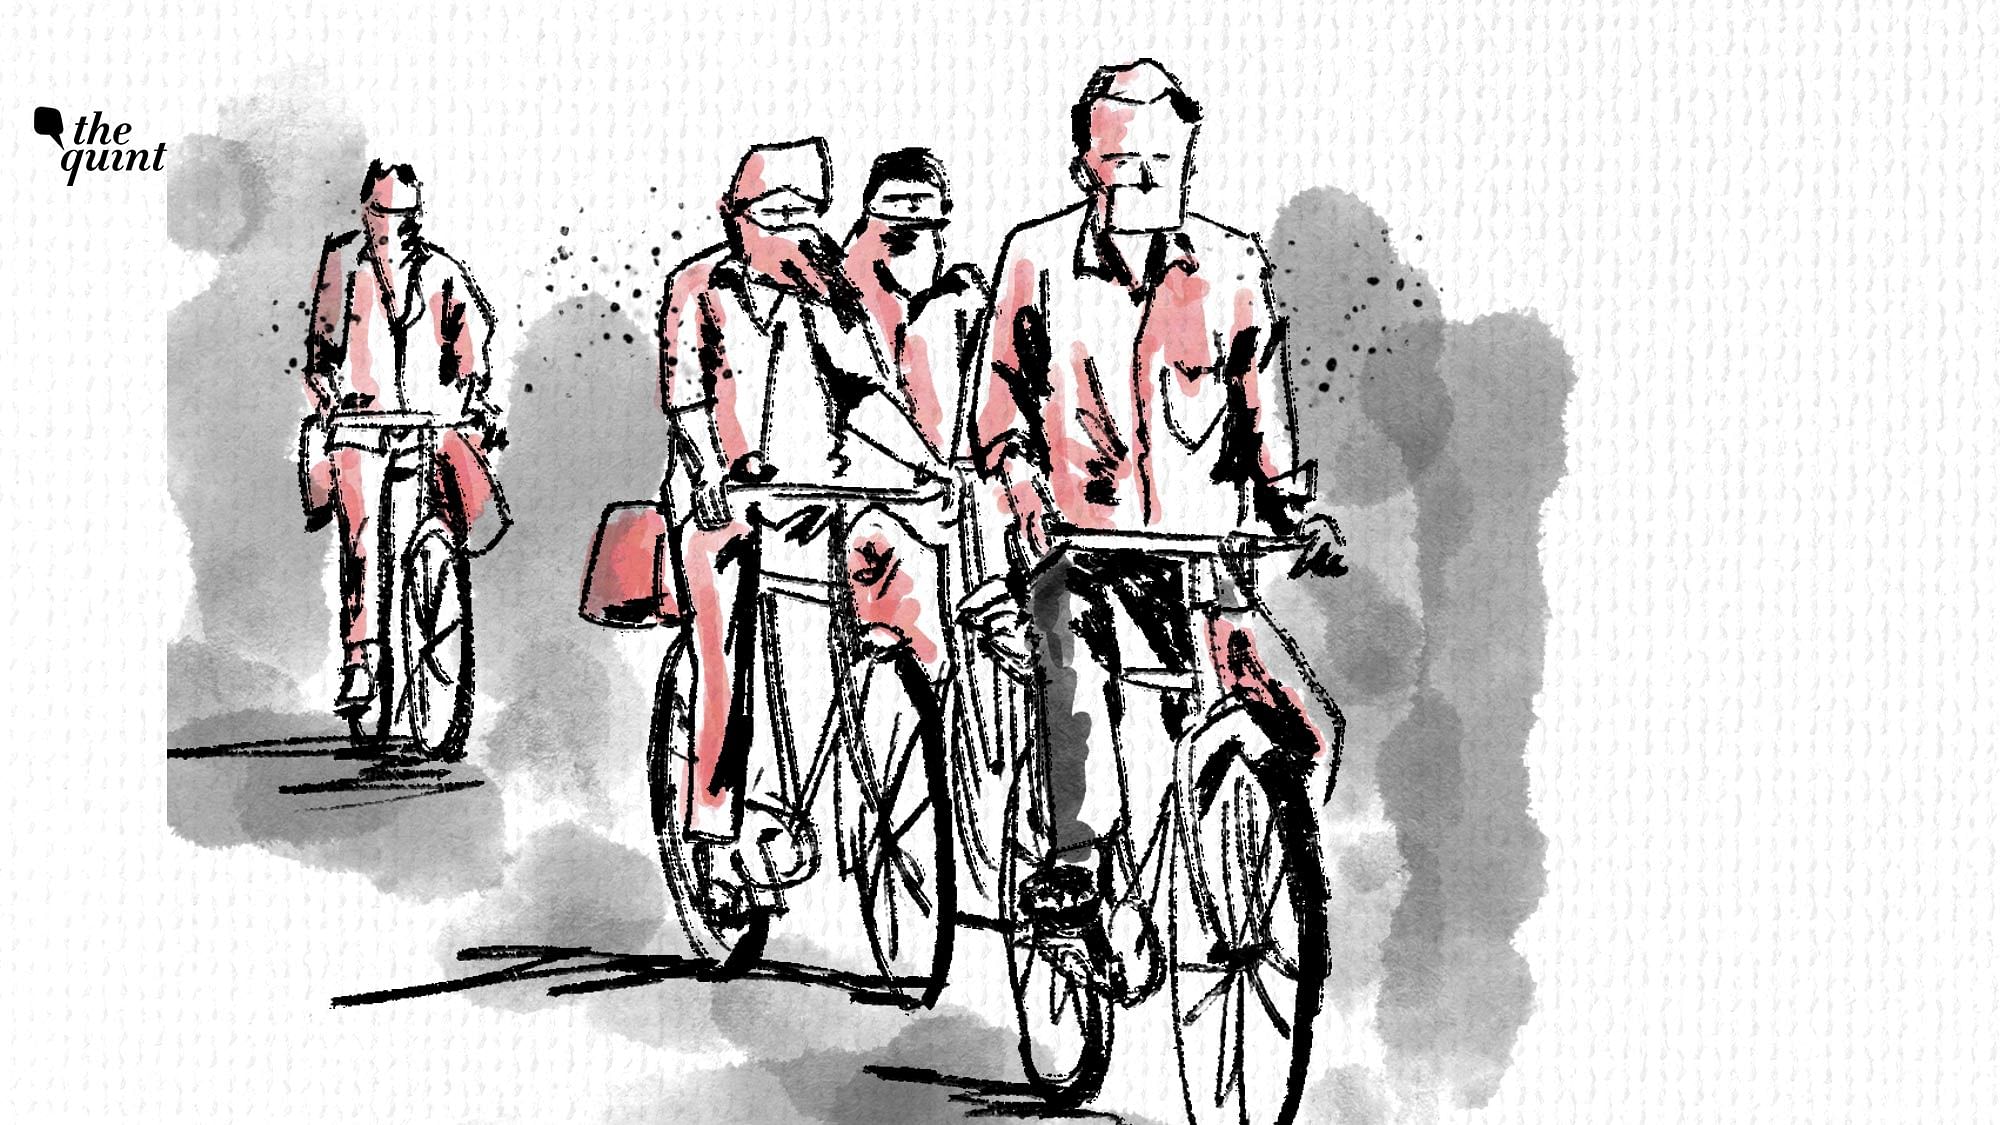 This story is about how four migrants, who despite the vulnerable position they were in, refused to give up on their cycles.